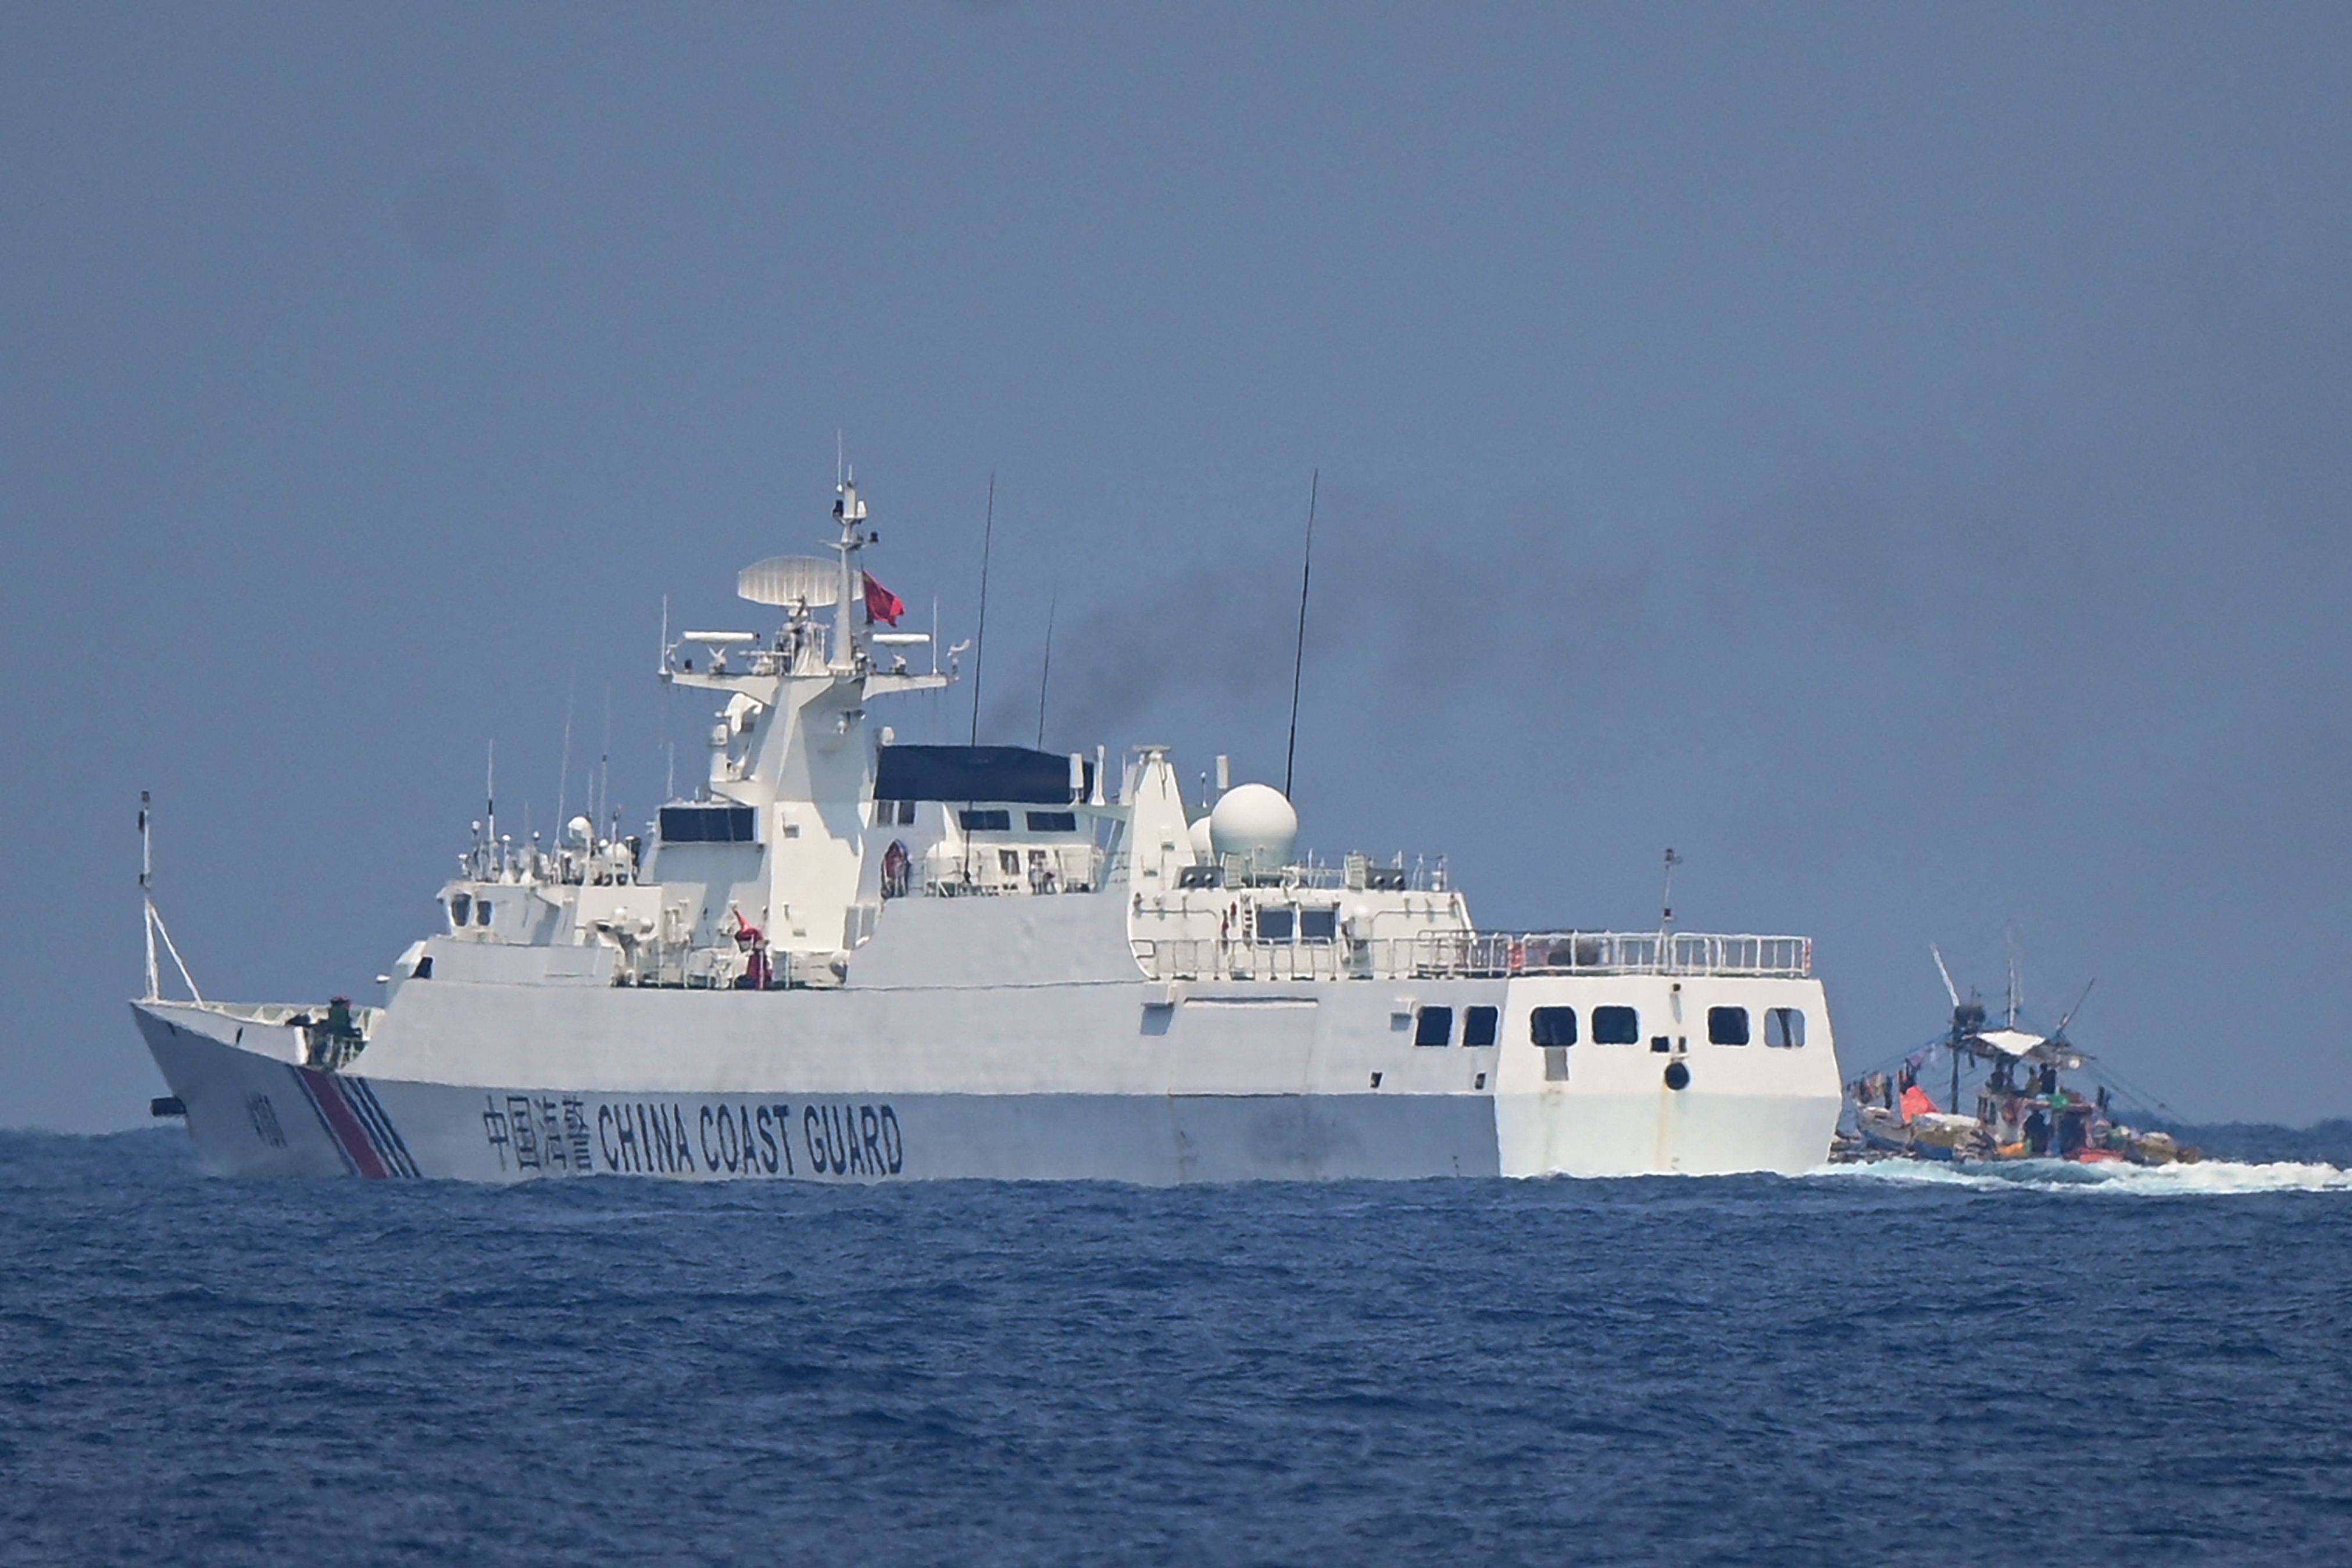 A Chinese coastguard ship sails past a Philippine fishing boat in the disputed South China Sea on May 16. Photo: AFP